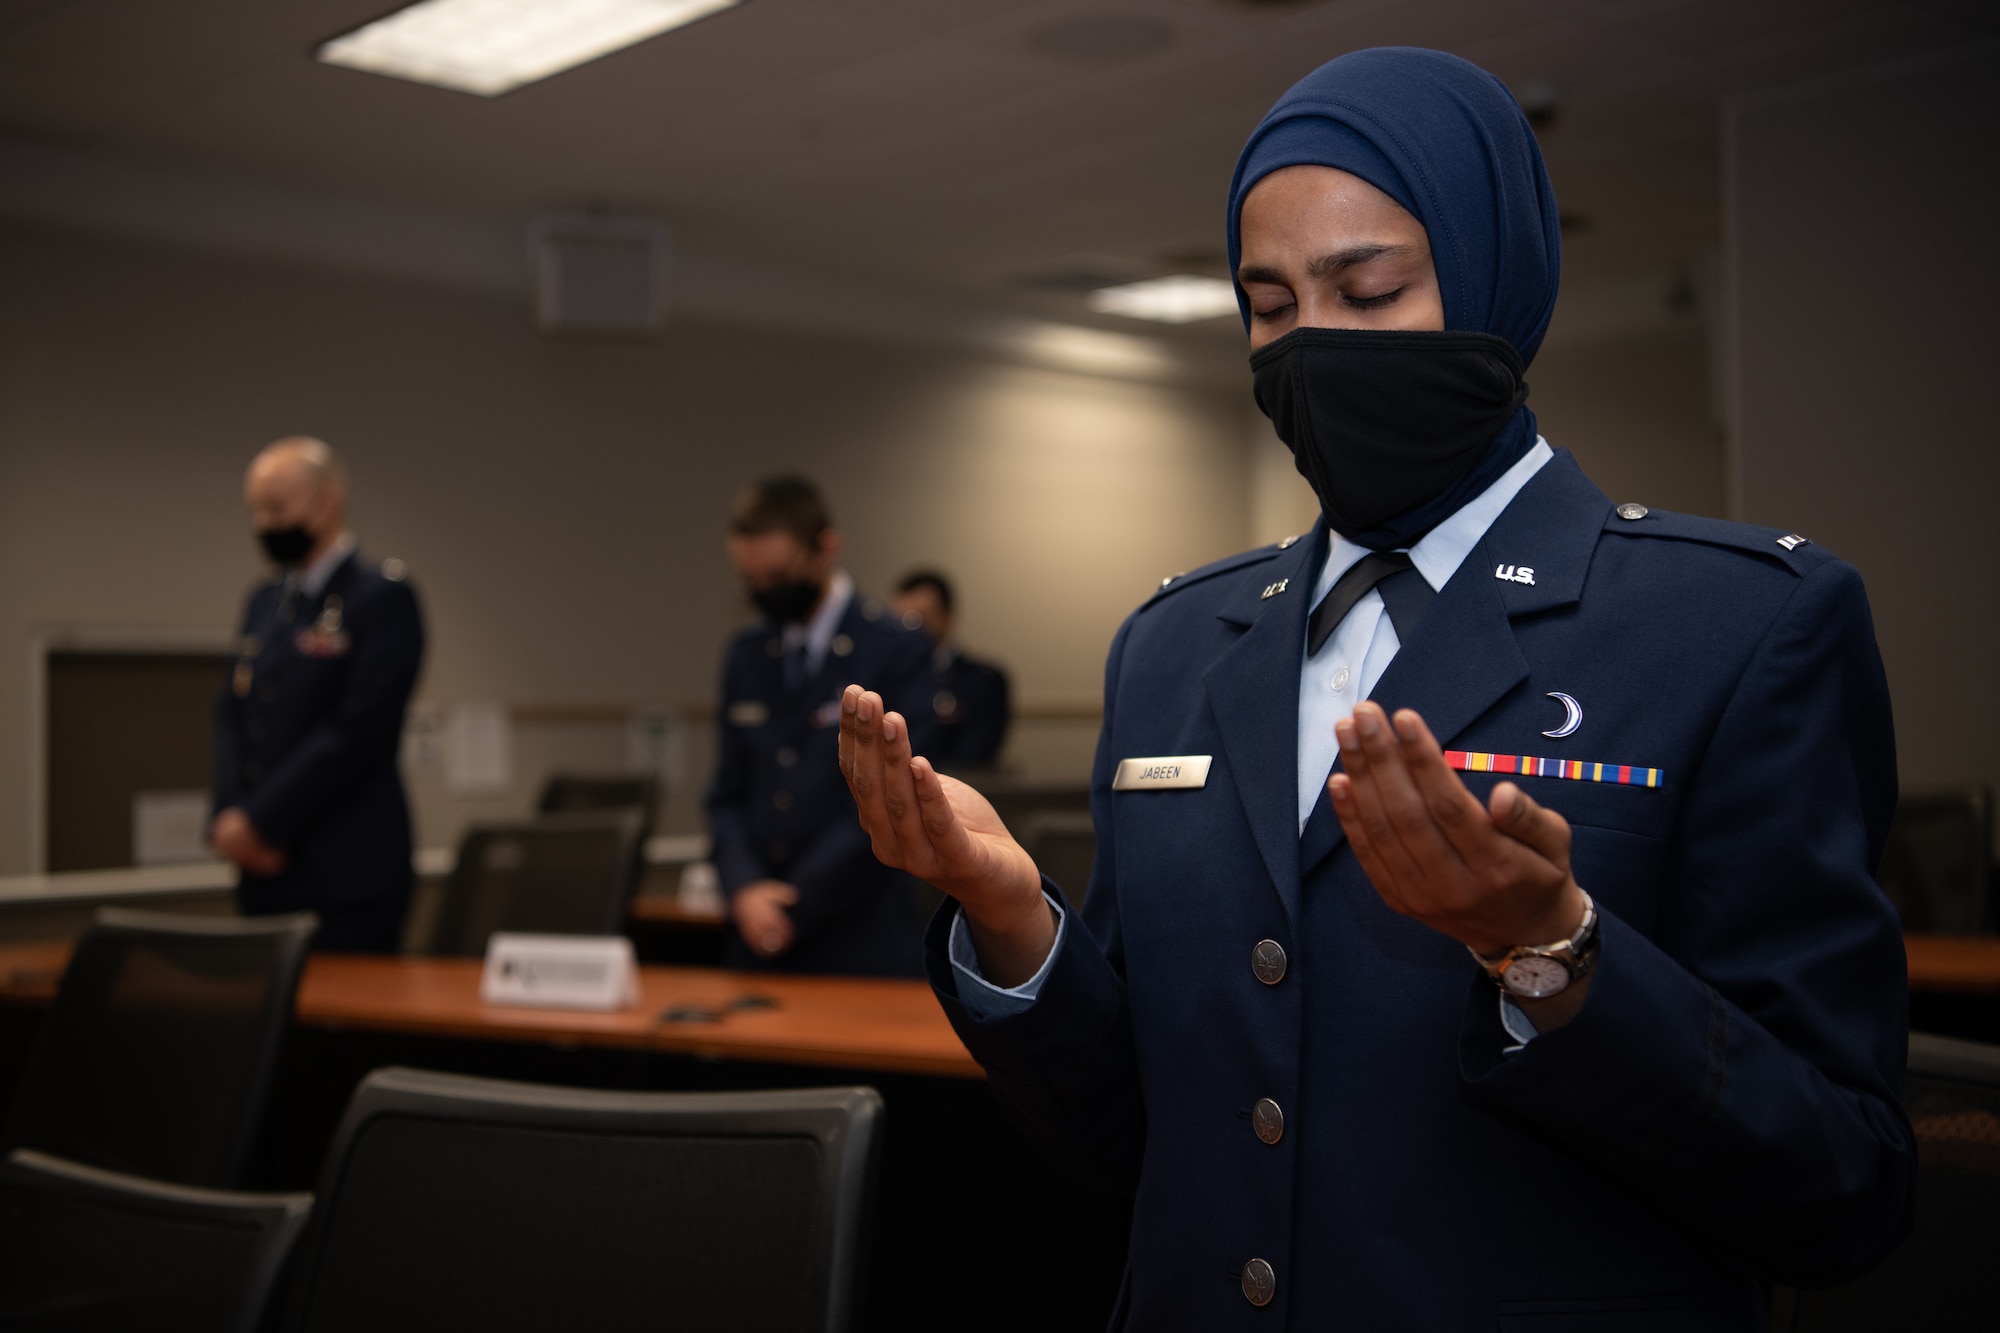 First Lt. Saleha Jabeen, a graduate of Basic Chaplain Course Class 21A, raises her hands in prayer during a group prayer at the start of the graduation ceremony Feb. 5, 2021, at the Ira C. Eaker Center for Leadership Development on Maxwell Air Force Base, Ala. Jabeen, a native of India, is the first female Muslim chaplain to serve in the U.S. military.